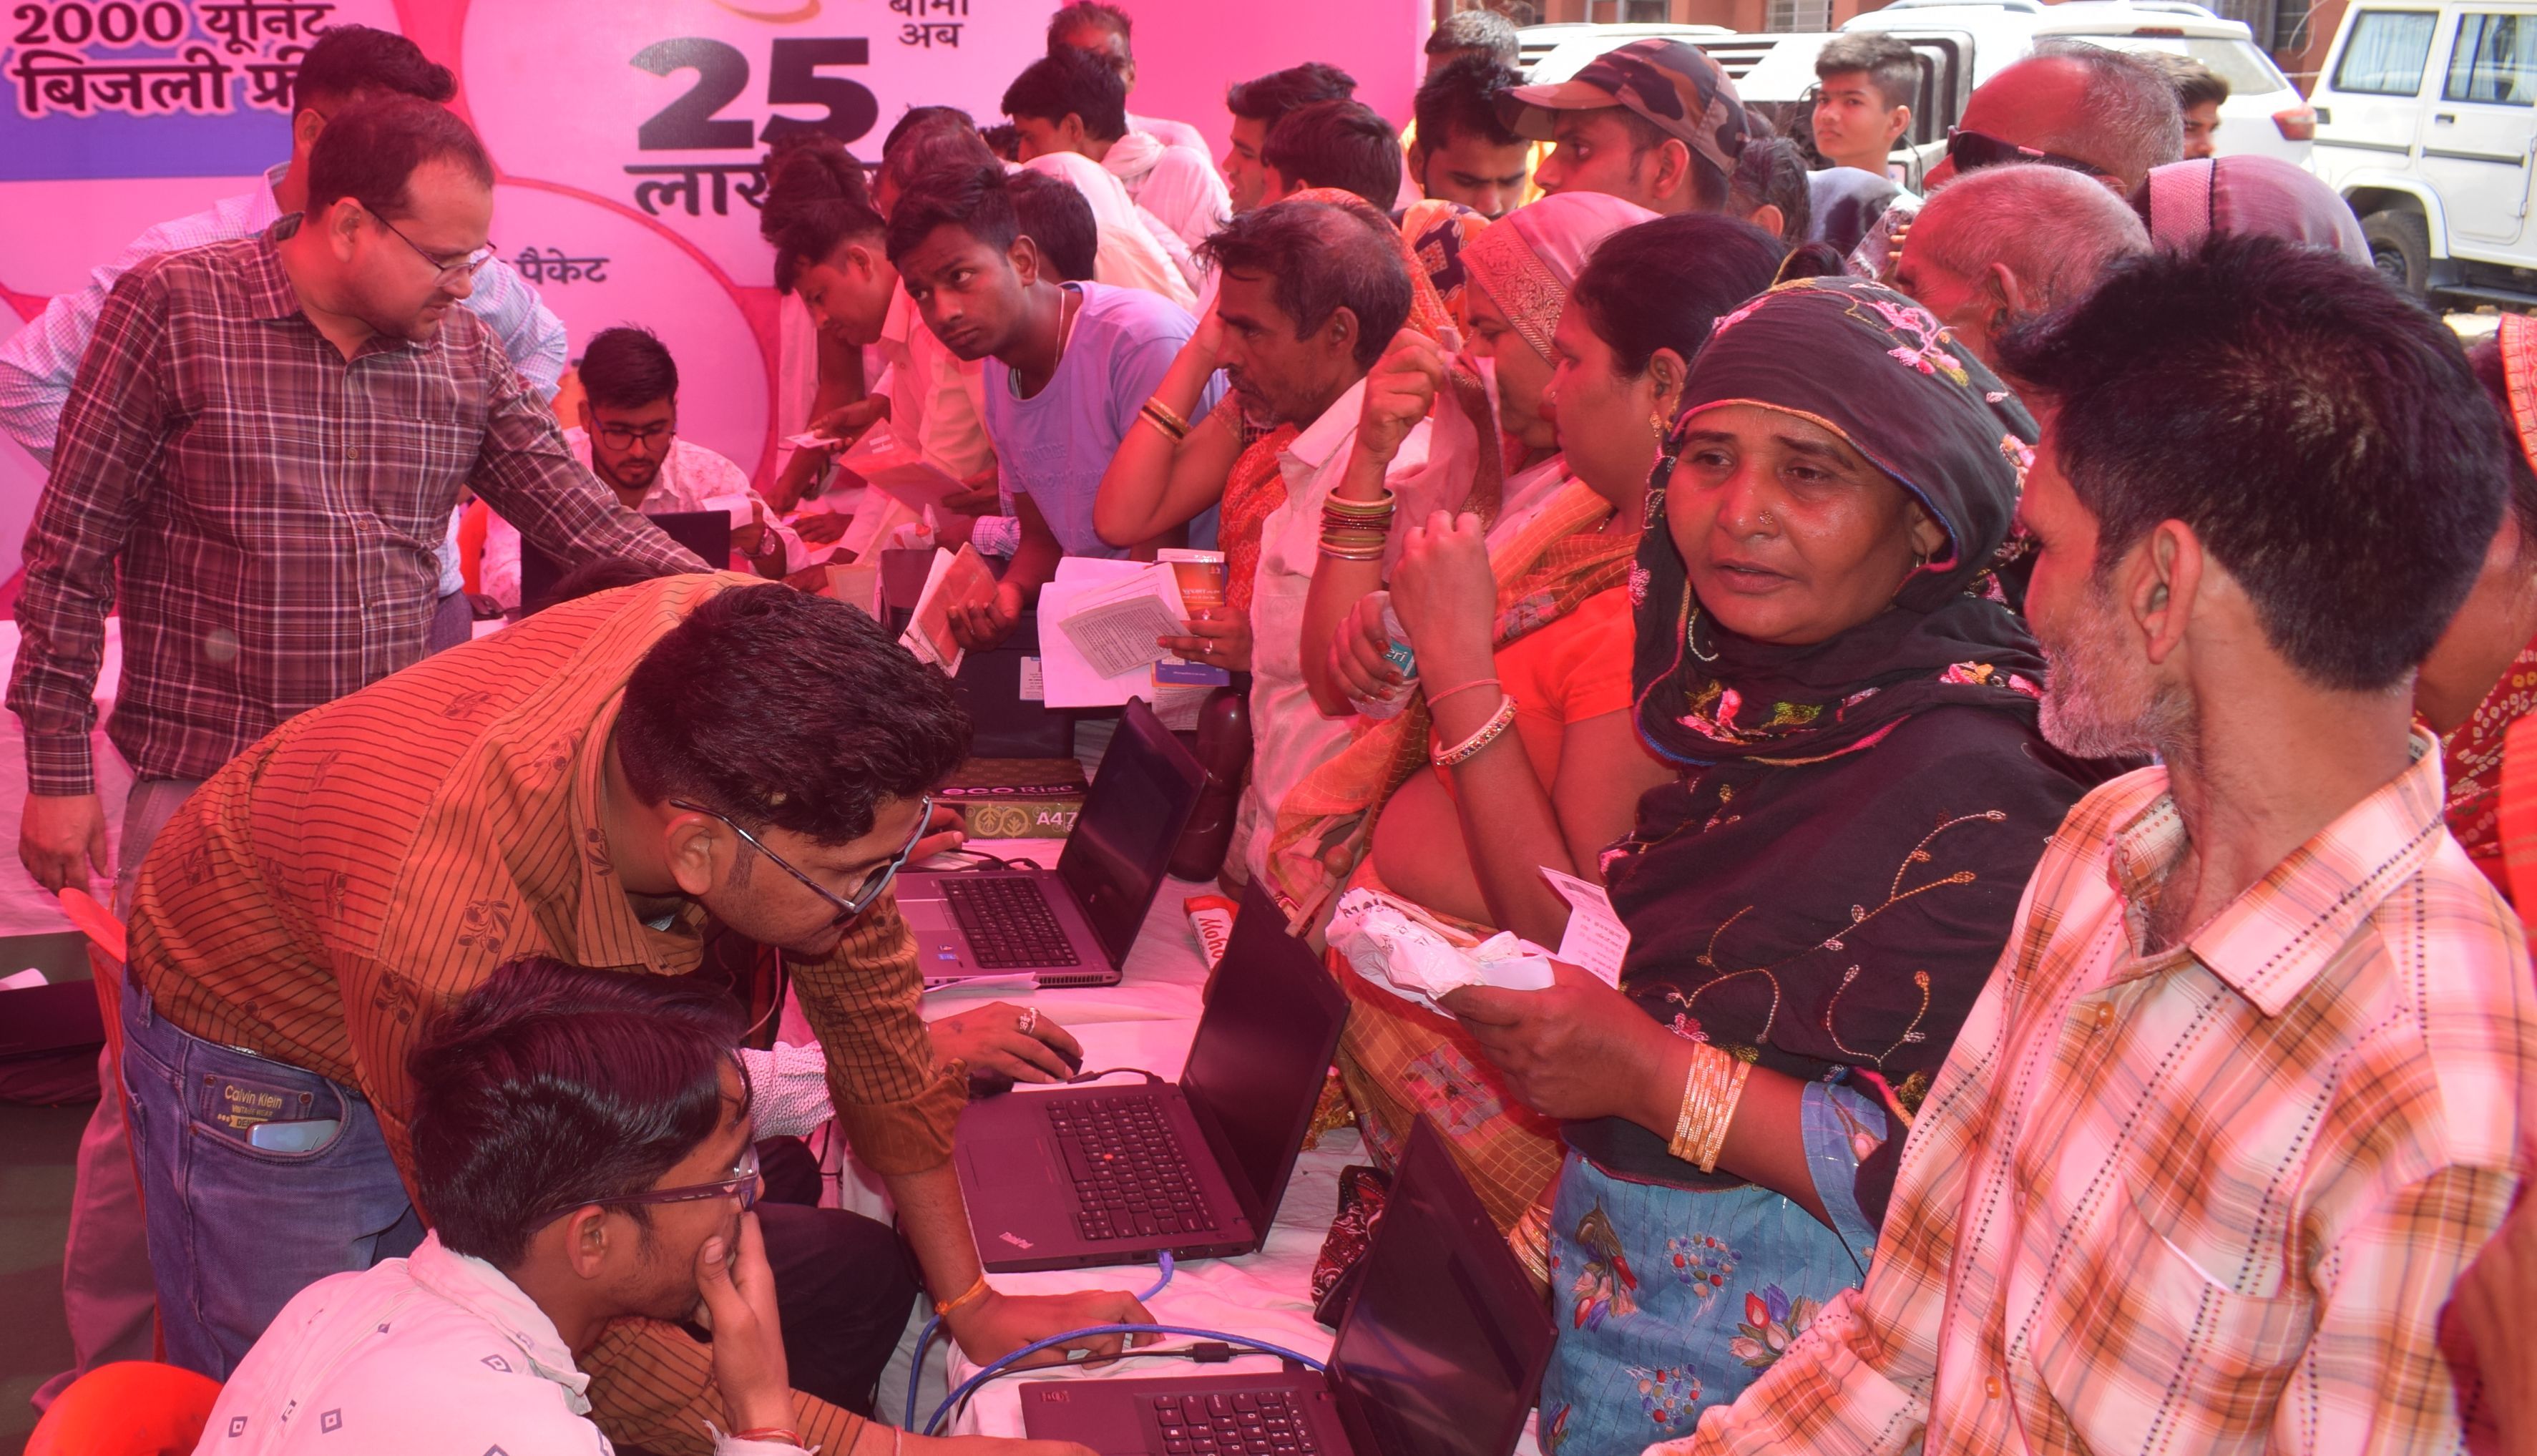 So far 2.61 lakh have registered in inflation relief camp, people are getting guarantee cards